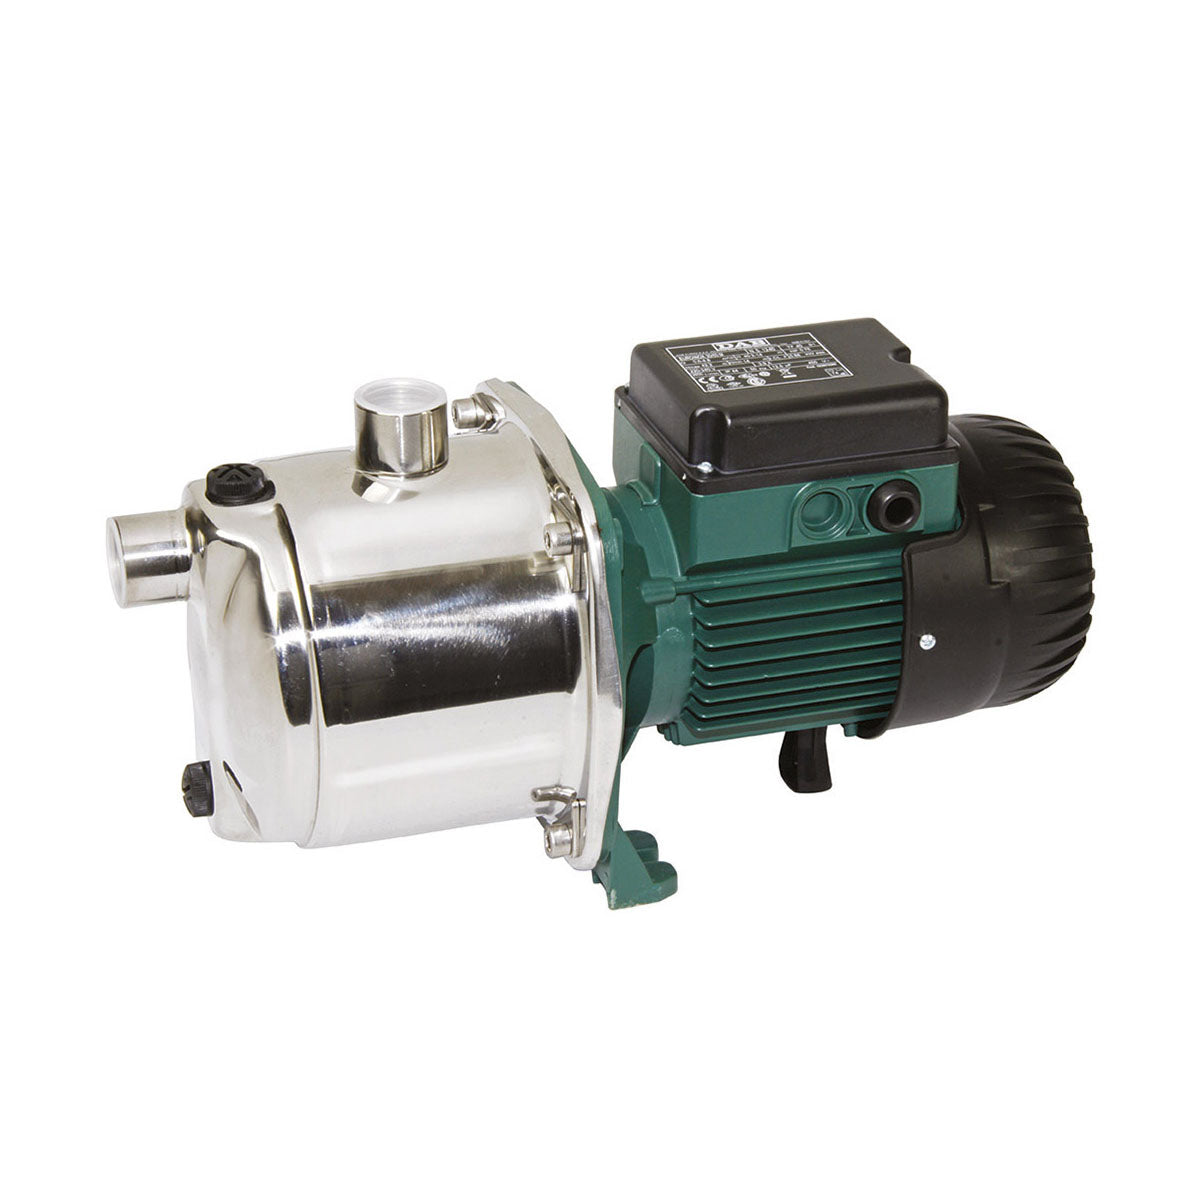 DAB Euroinox 40/80 pump with stainless steel pump body